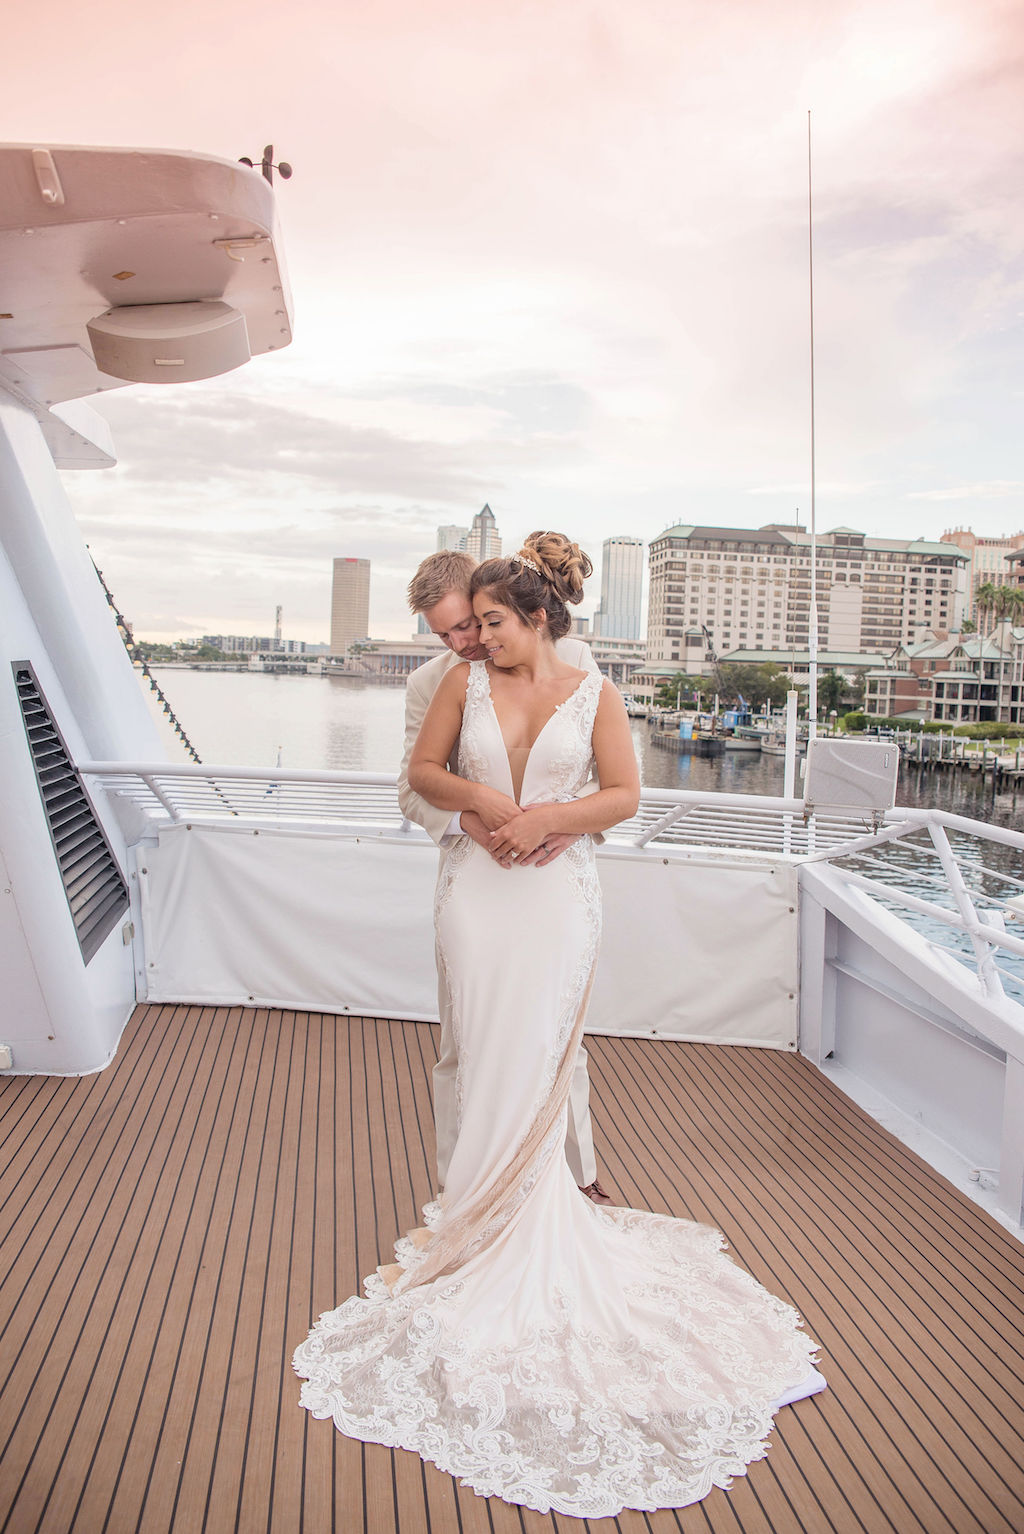 Florida Bride and Groom Sunset Wedding Portrait on Deck of Tampa Waterfront Venue Yacht Starship II, Bride in Deep V Neck Illusion Lace and Fitted Tank Top Strap Wedding Dress | Tampa Bay Wedding Photographer Kristen Marie Photography | Wedding Dress Nikki's Glitz and Glam Boutique | Hair and Makeup Destiny and Light Hair and Makeup Group